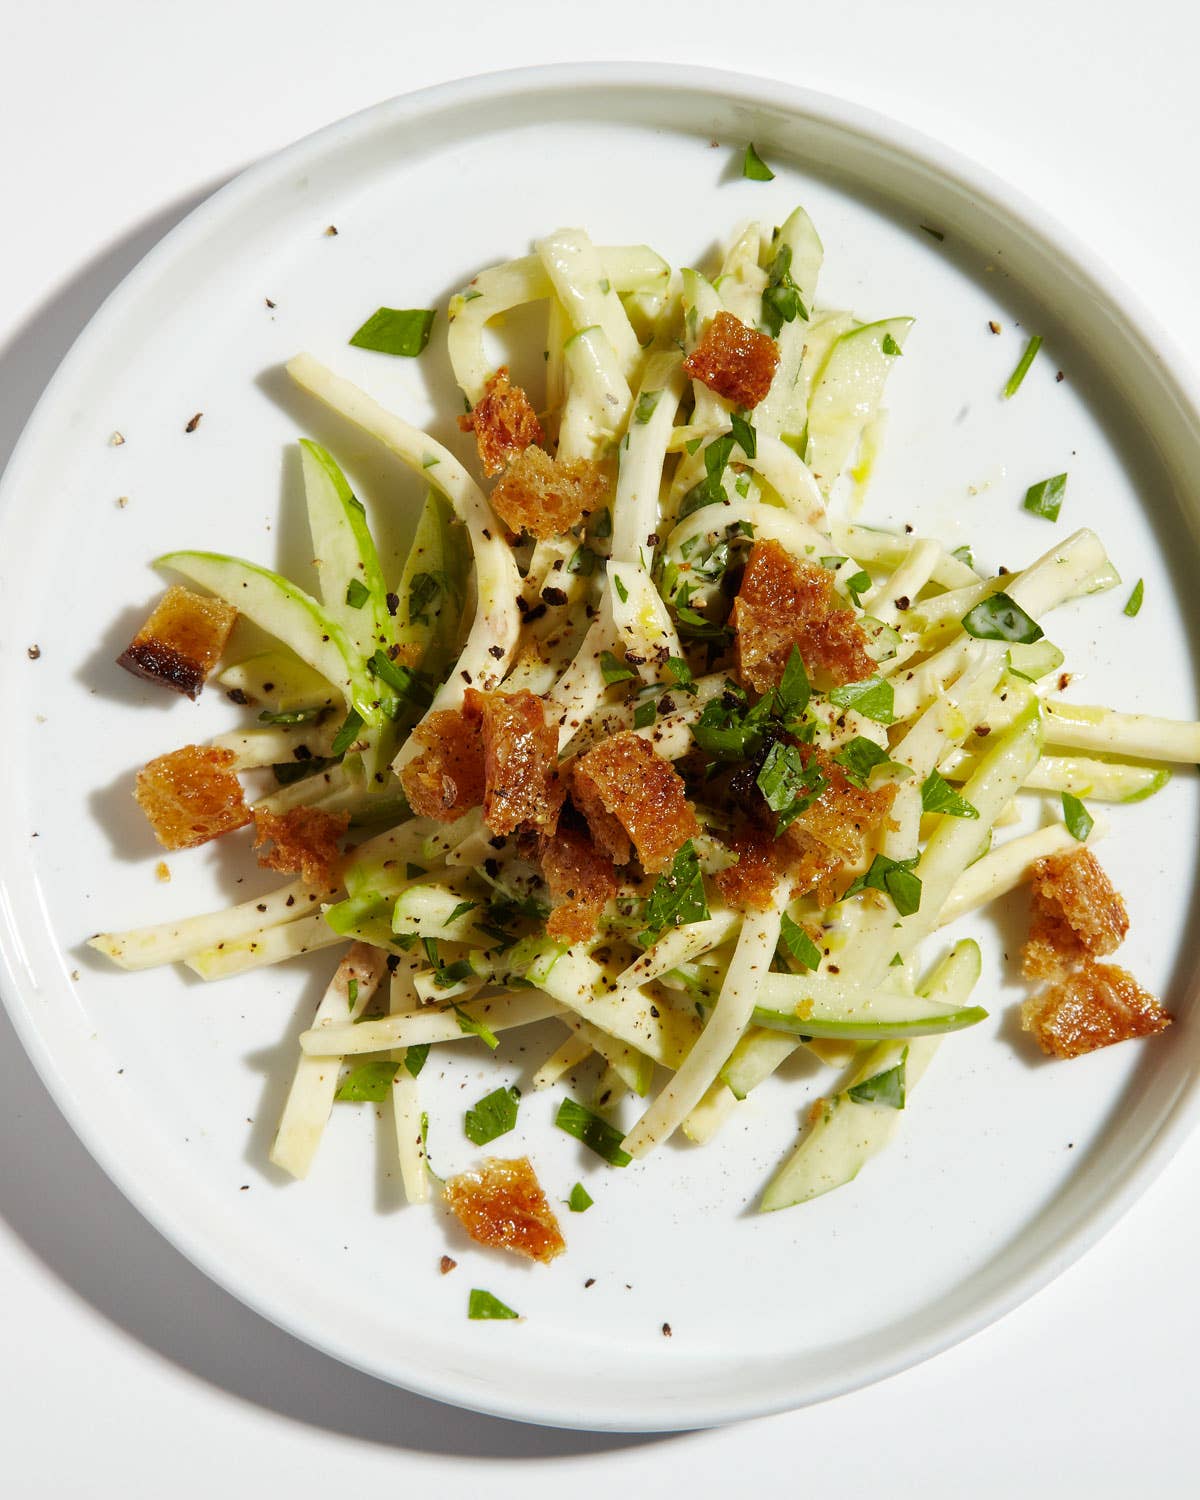 Raw Celery Root Salad with Apples and Parsley | Dan Kluger